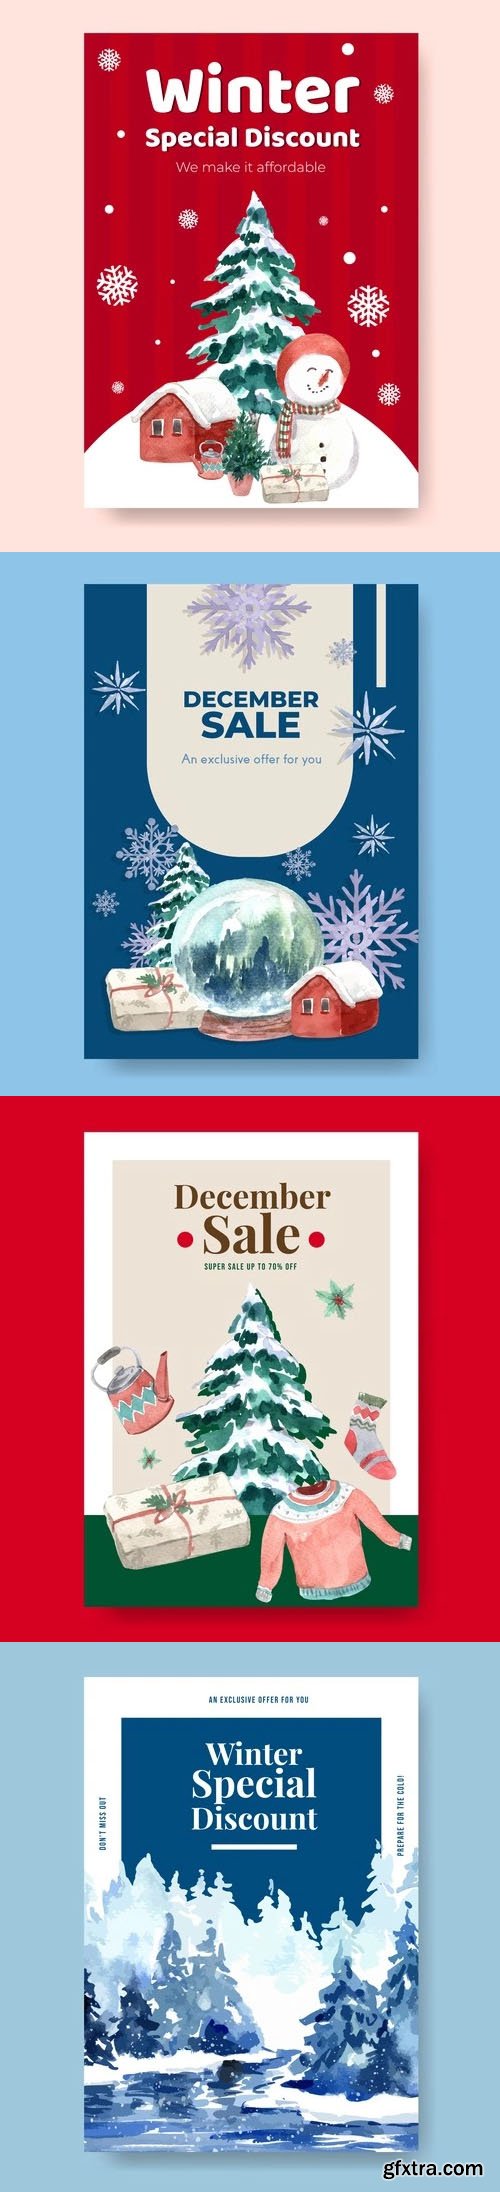 Hand Drawn Winter Sales Posters Collection Vol.2 - 8 Vector Templates